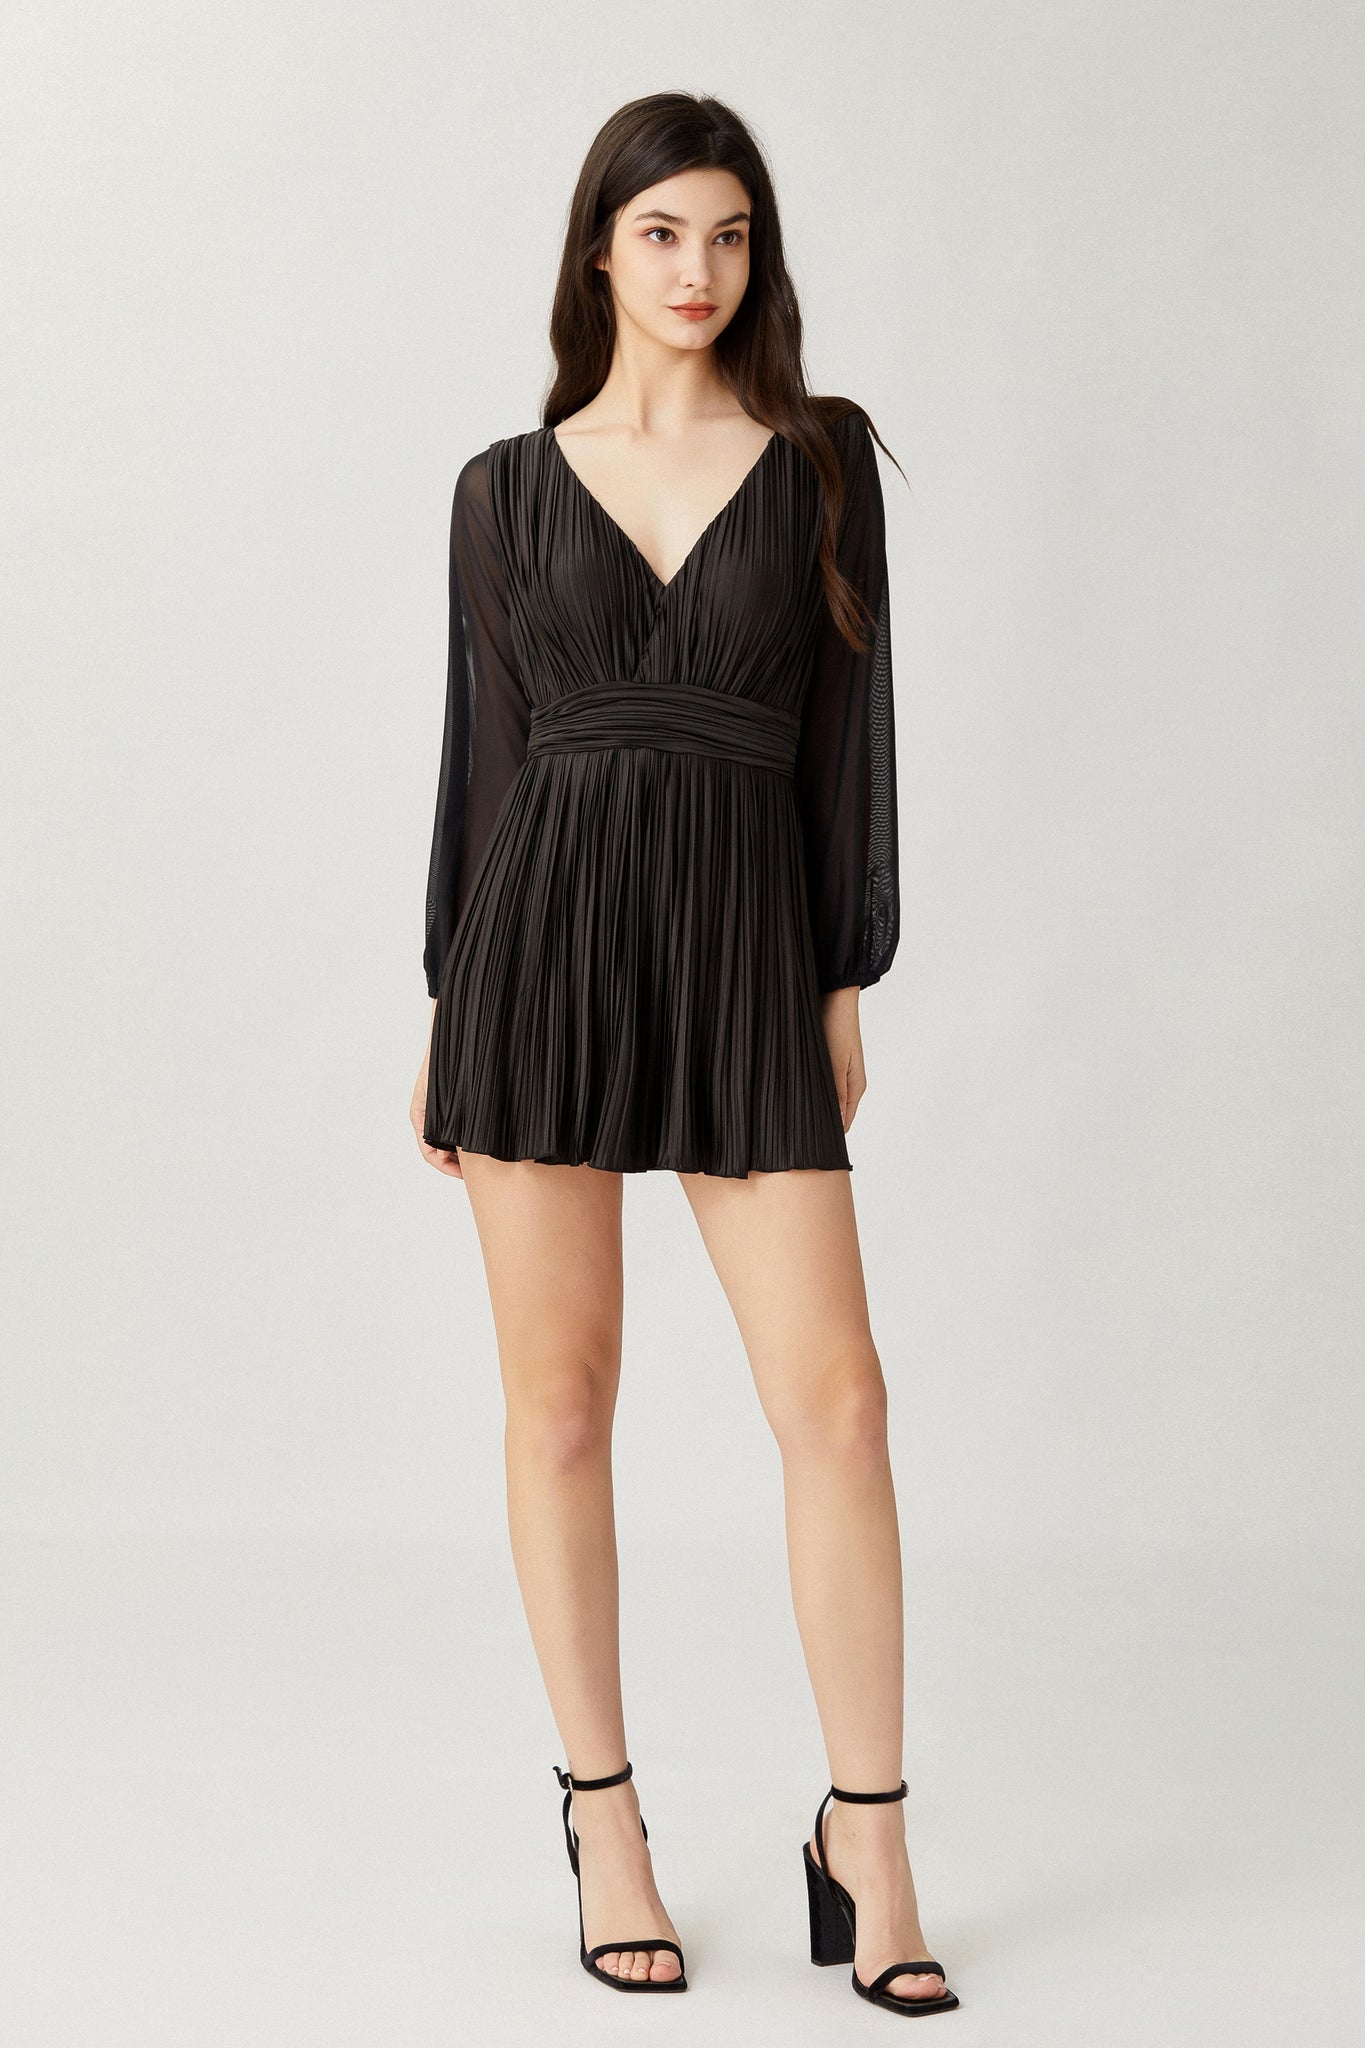 Sylphide | Charley Black Ruffled One-Piece Swimsuit